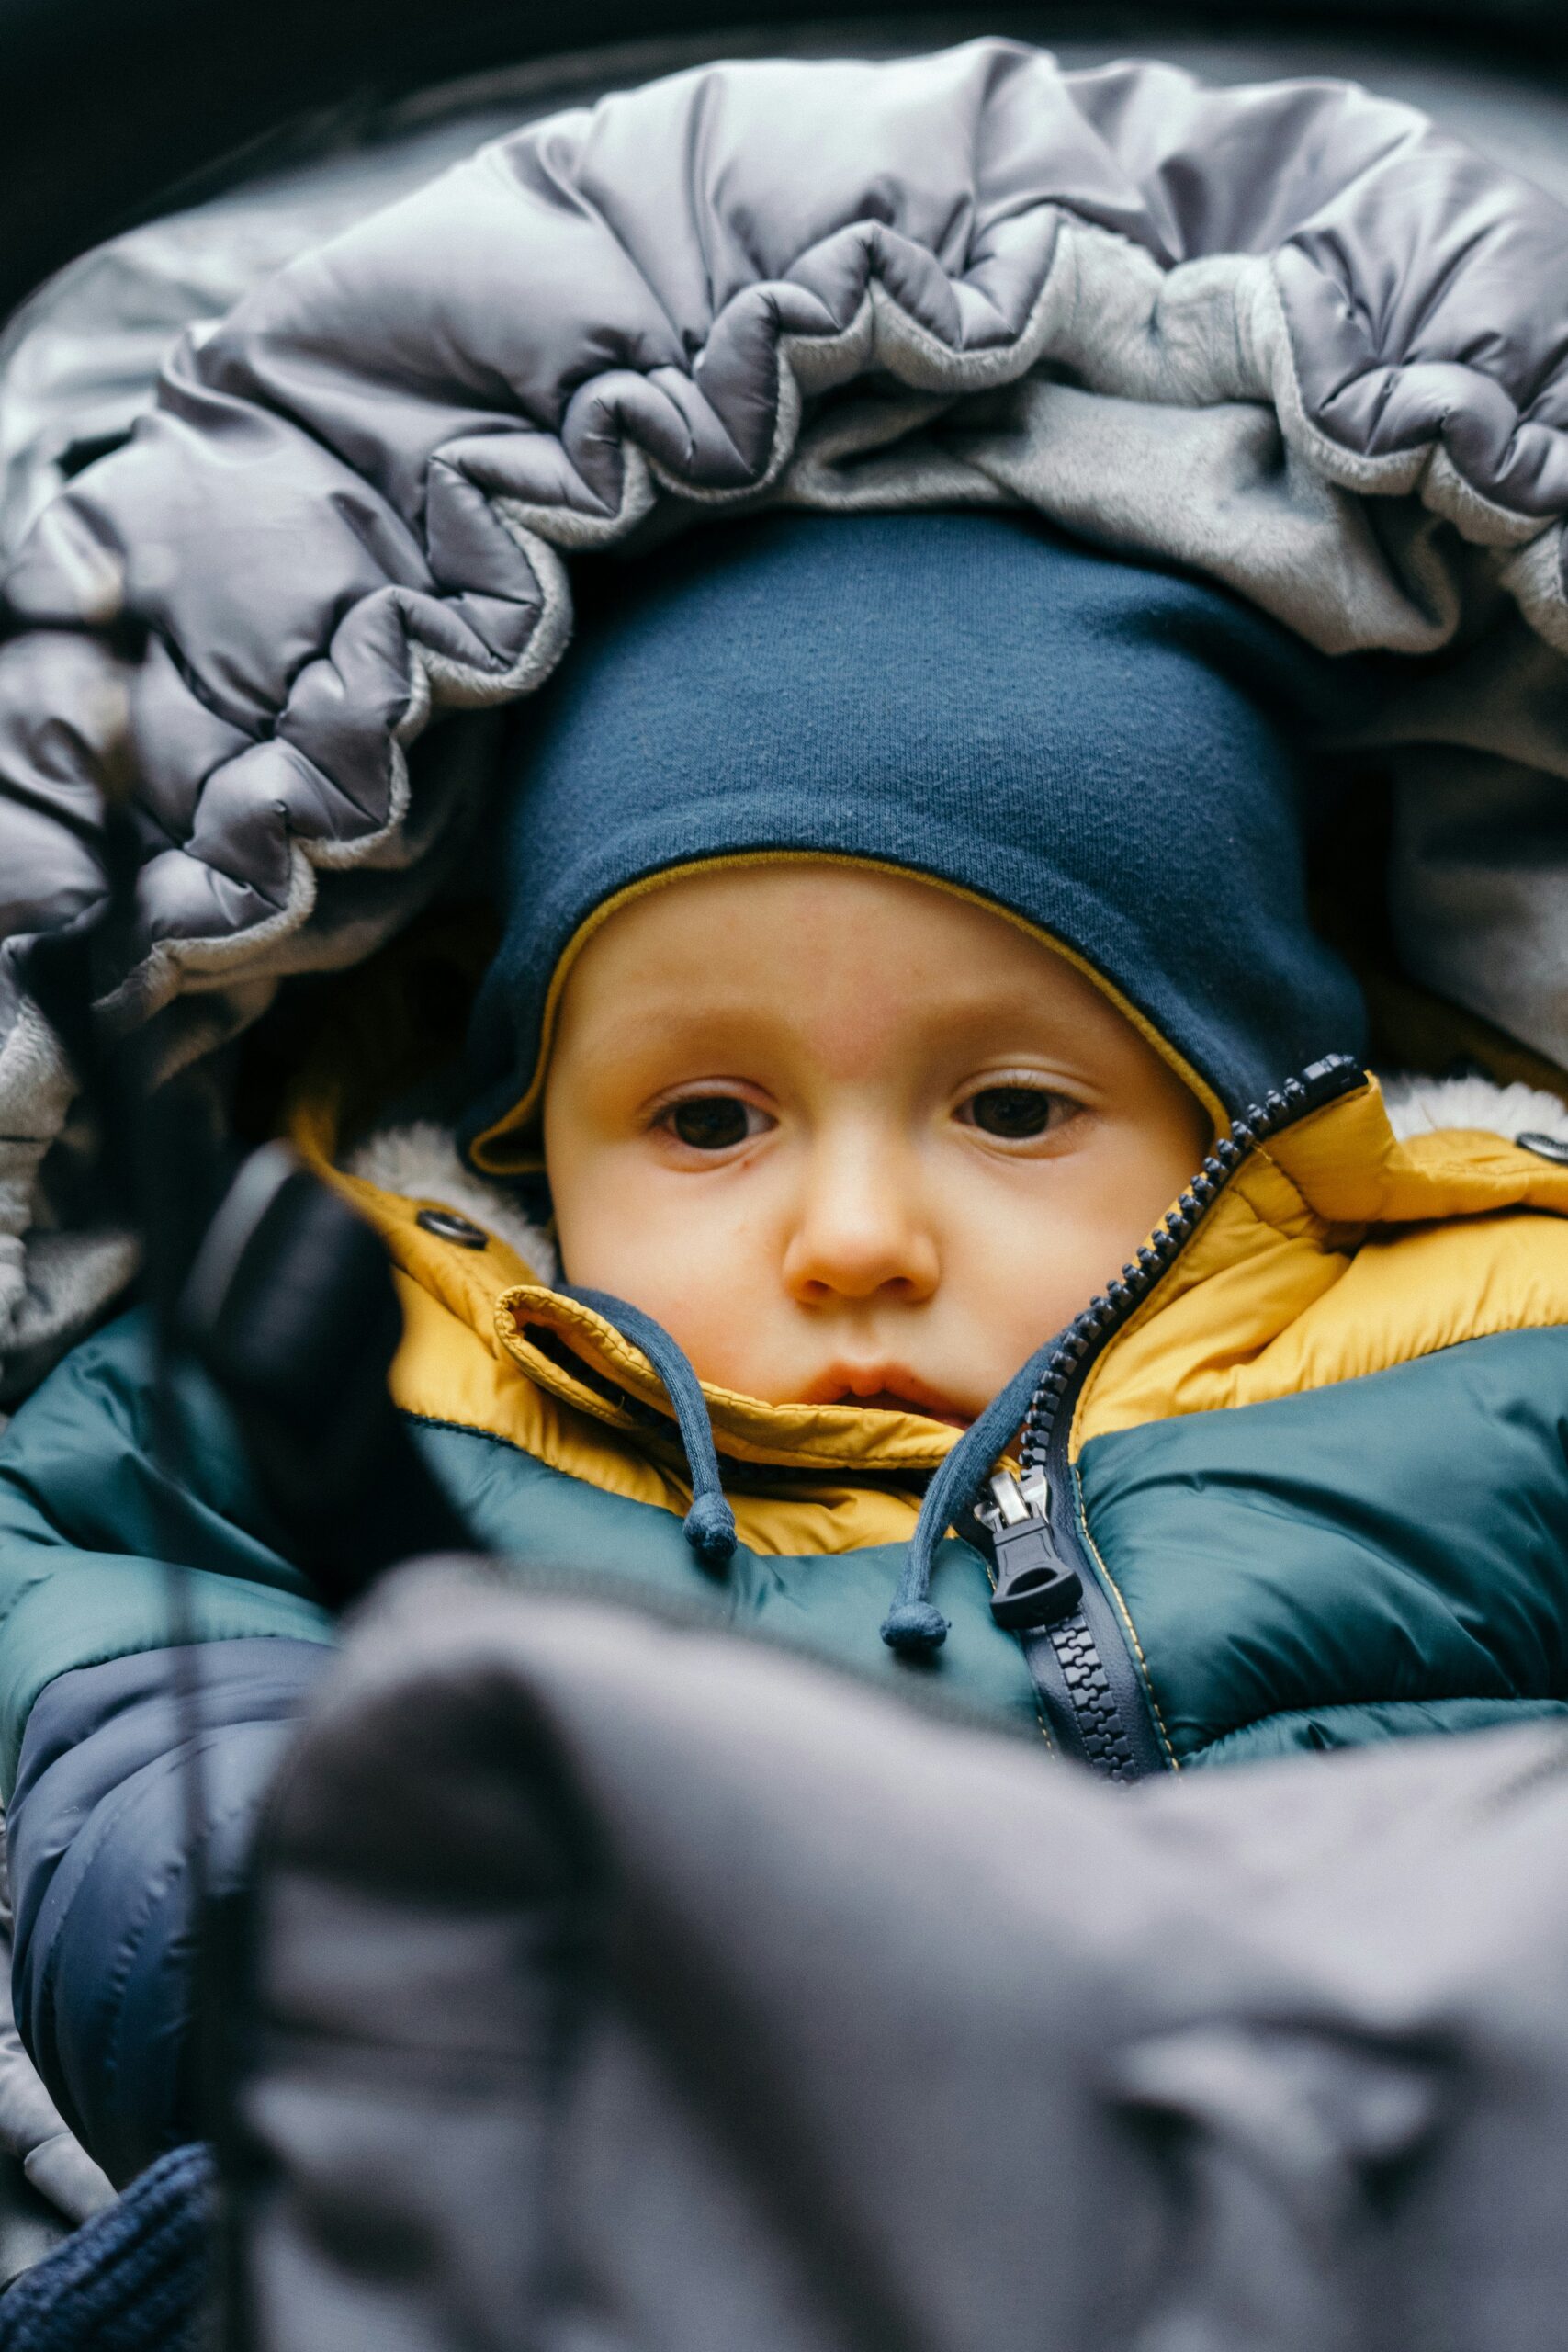 This picture shows a baby bundled up in warm clothes for a blog on cutting down on heating bills this winter.